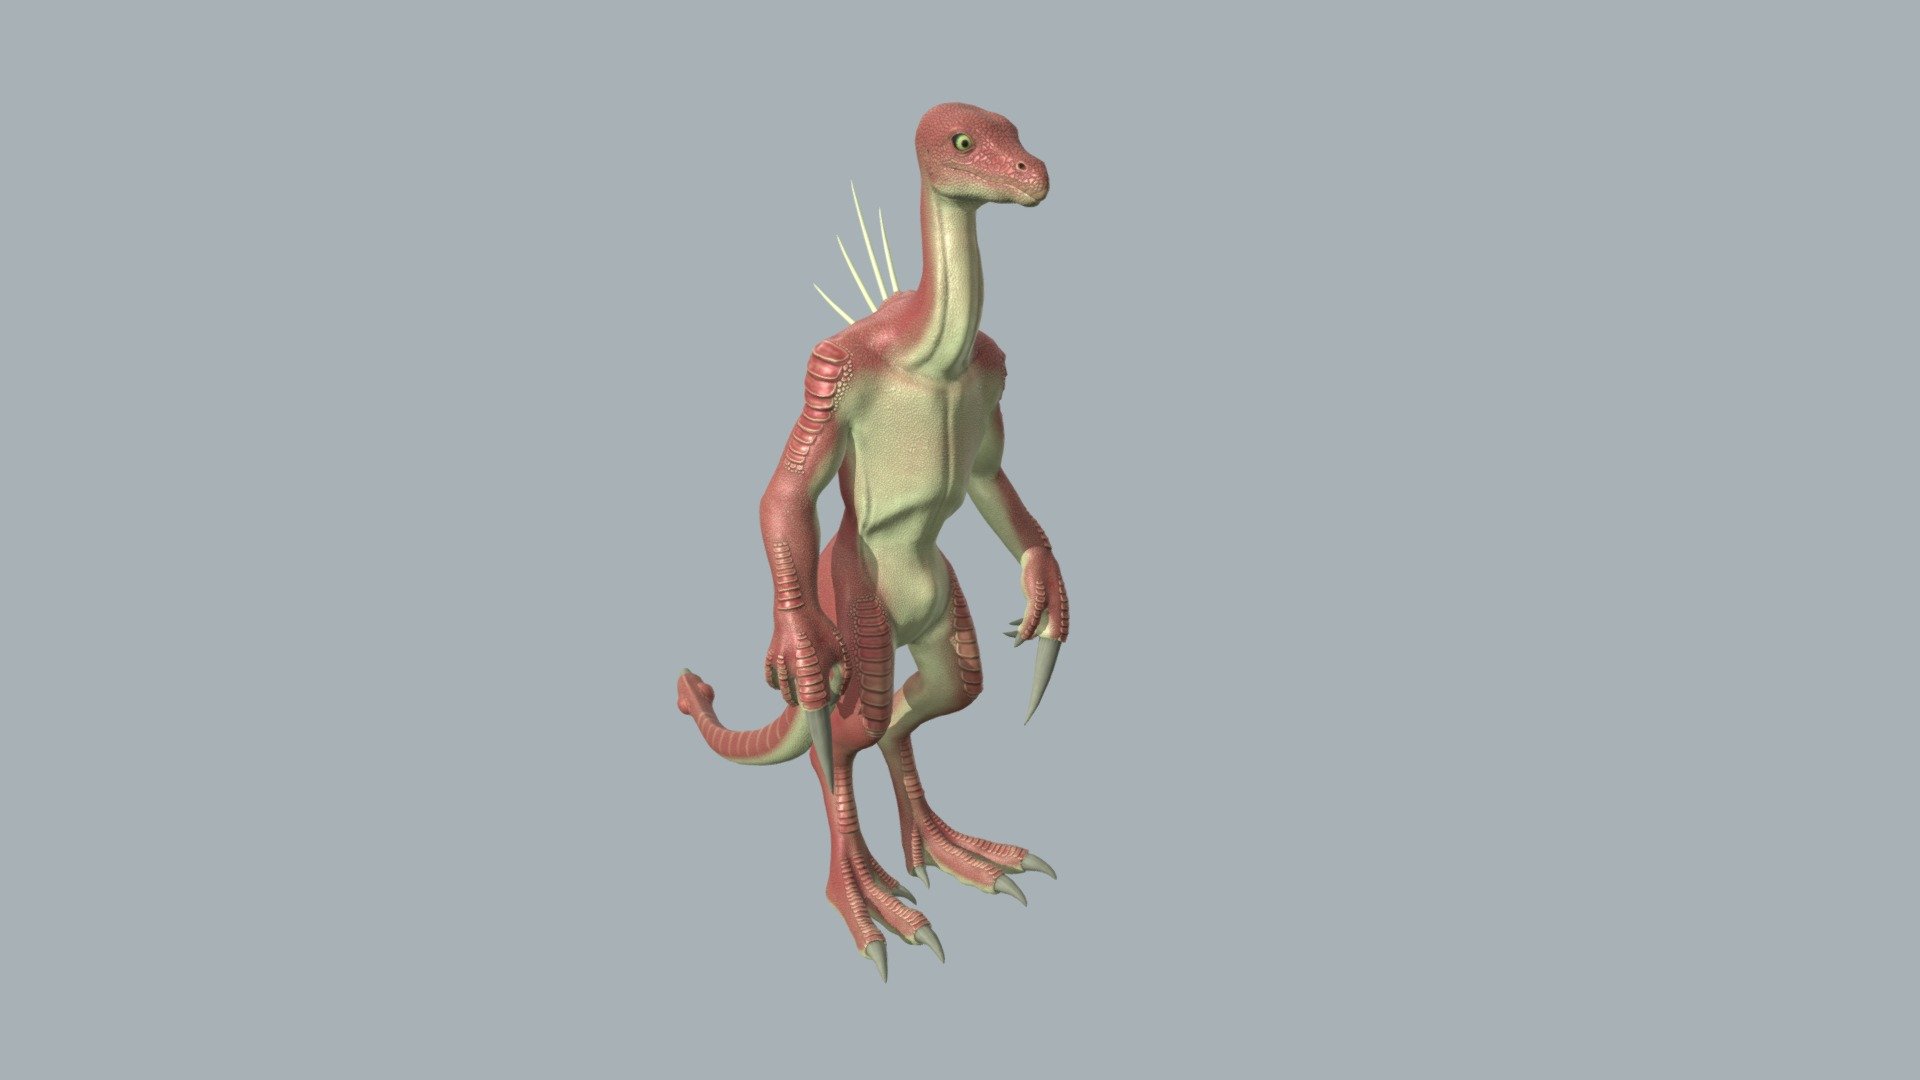 Here's a funny lizard-lookin man I made. Its design is loosely based on ancient Triassic-era reptiles, the Drepanosaurs. Drepanoids are reptilian humanoid creatures with a peaceful disposition. Standing at about 7.8 feet tall, they tall as hell 3d model